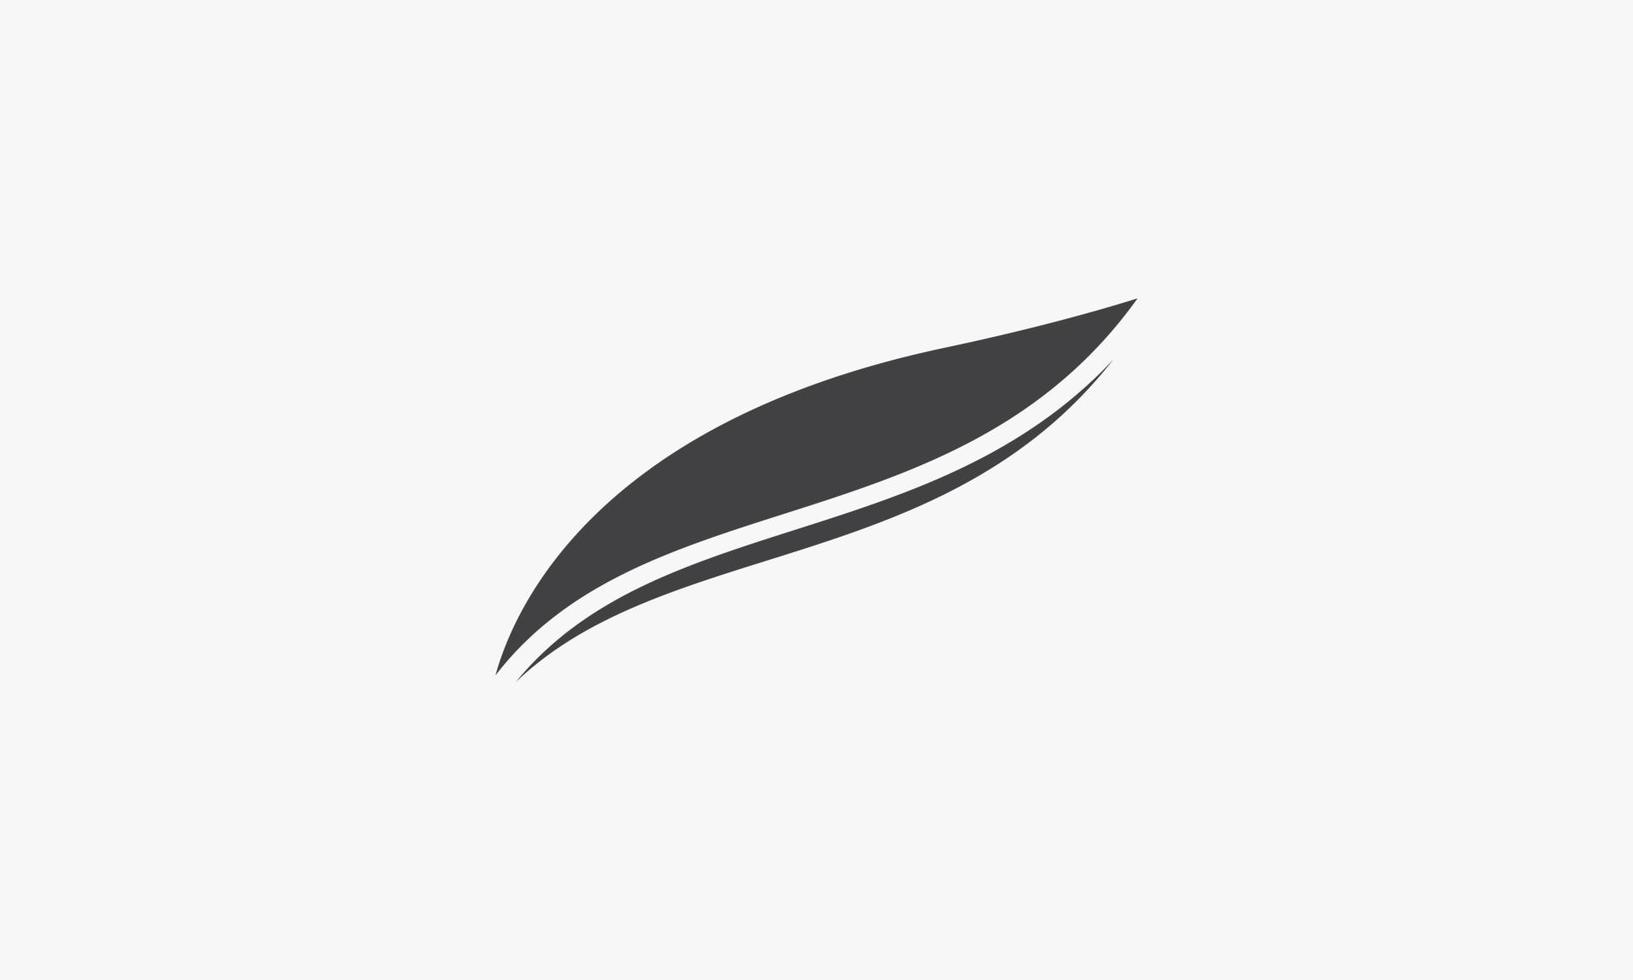 feather curved vector illustration on white background. creative icon.